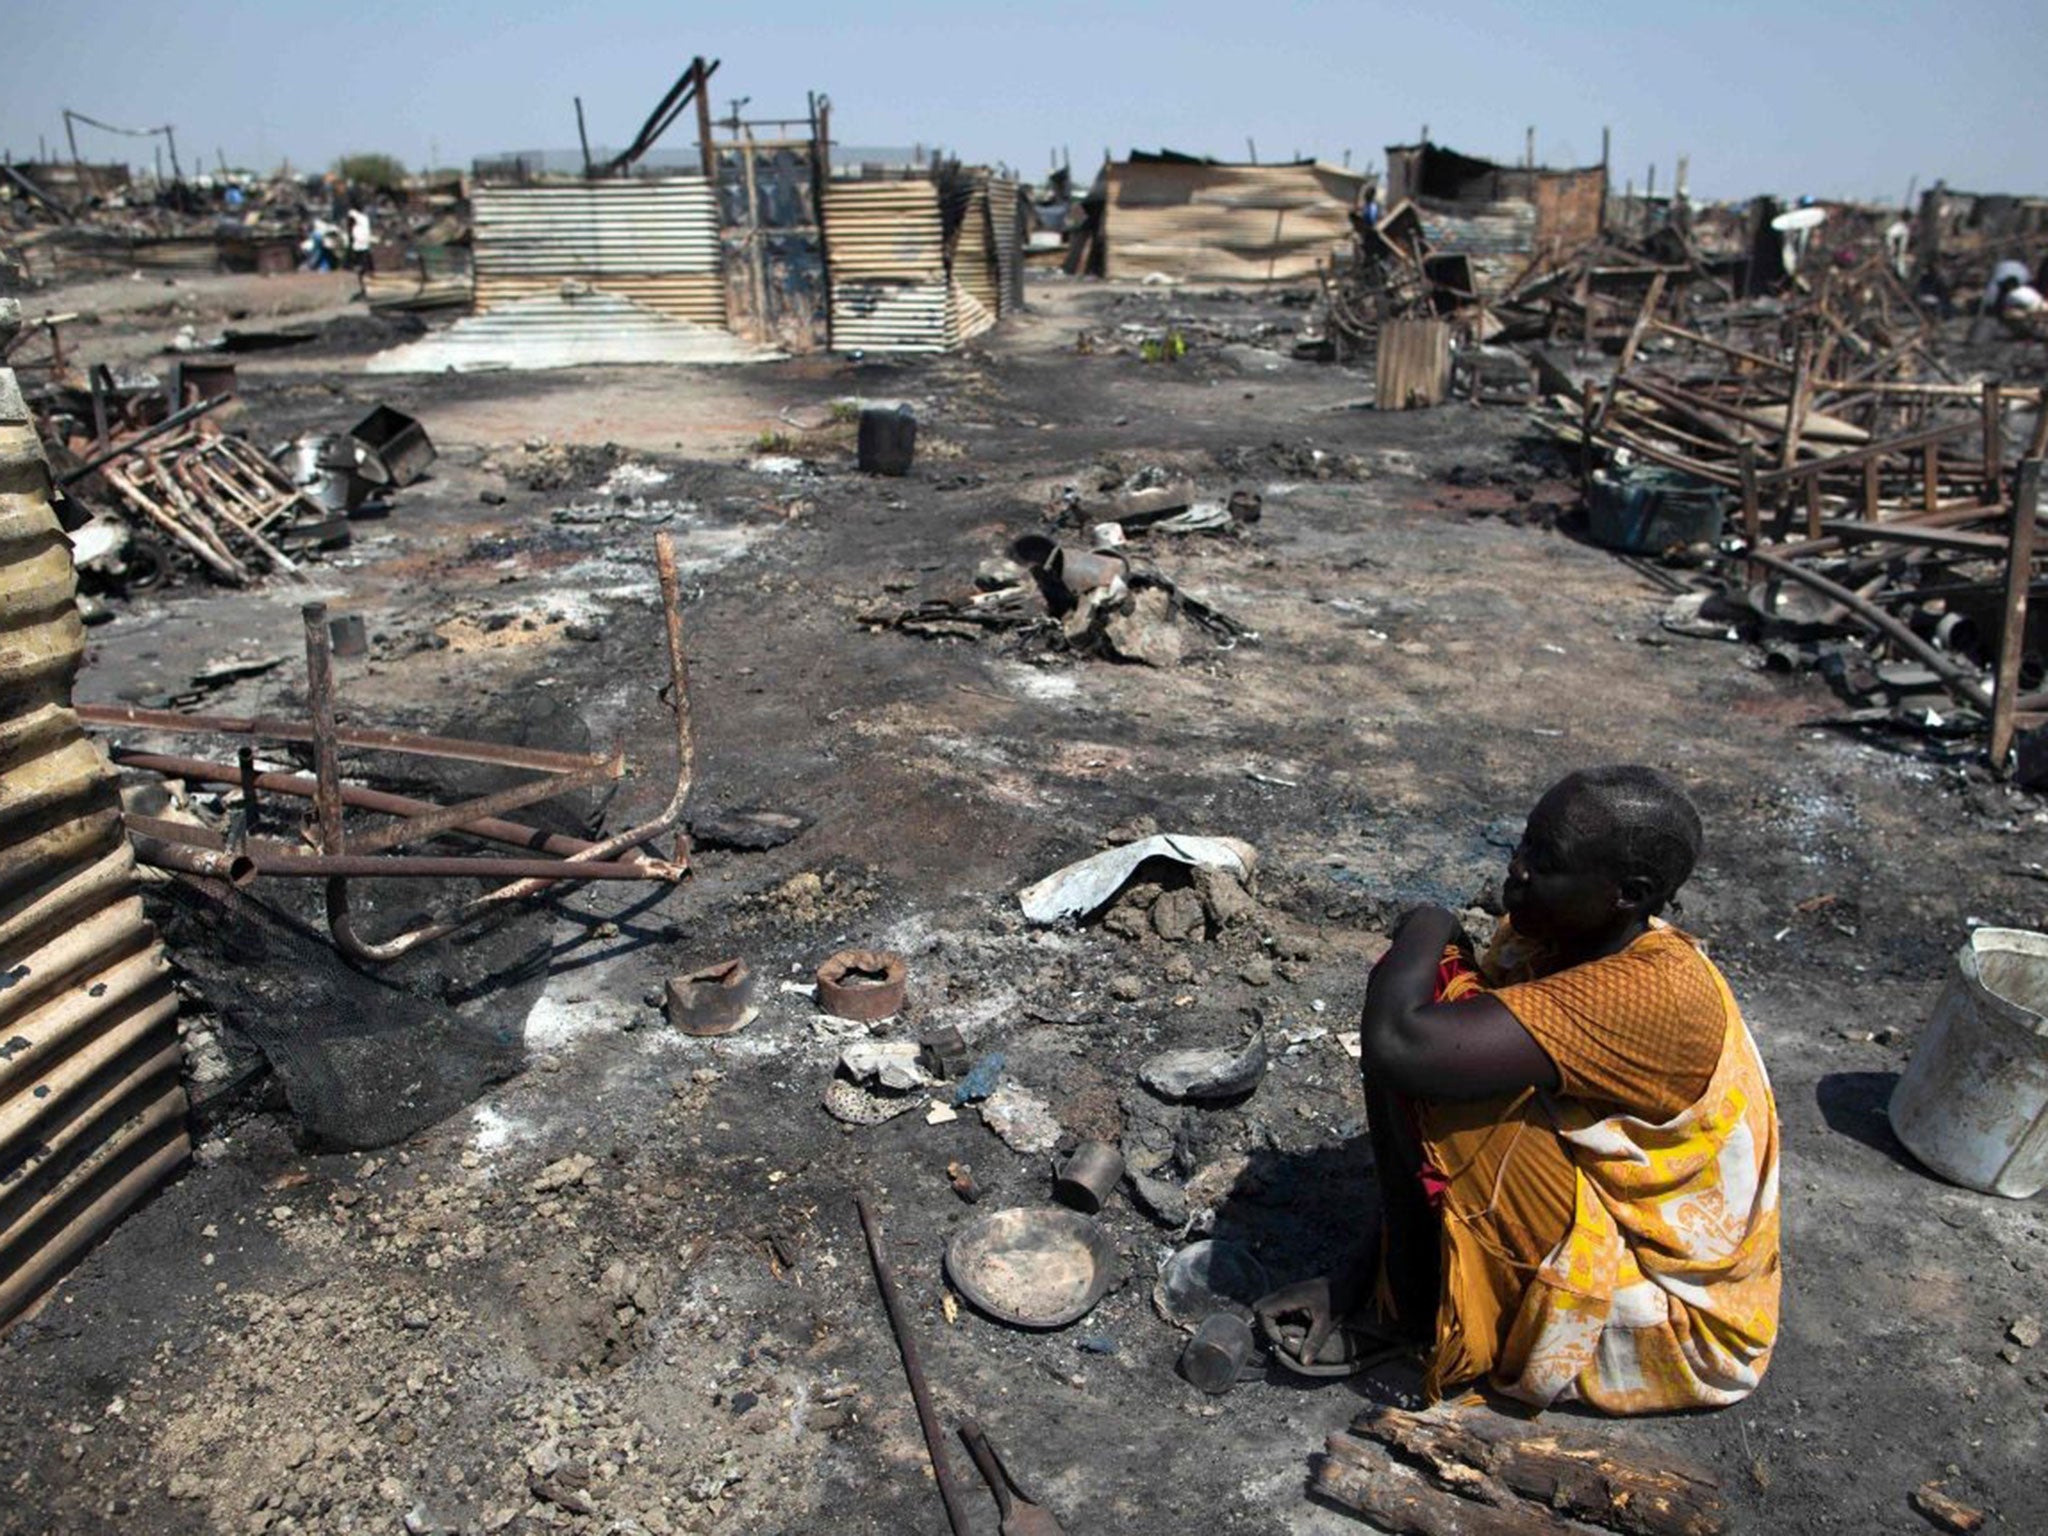 A displaced woman in a Protection of Civilians (PoC) site in Malakal, where 25 were killed and 120 wounded when soldiers attacked burned a UN camp on March 4, 2016.